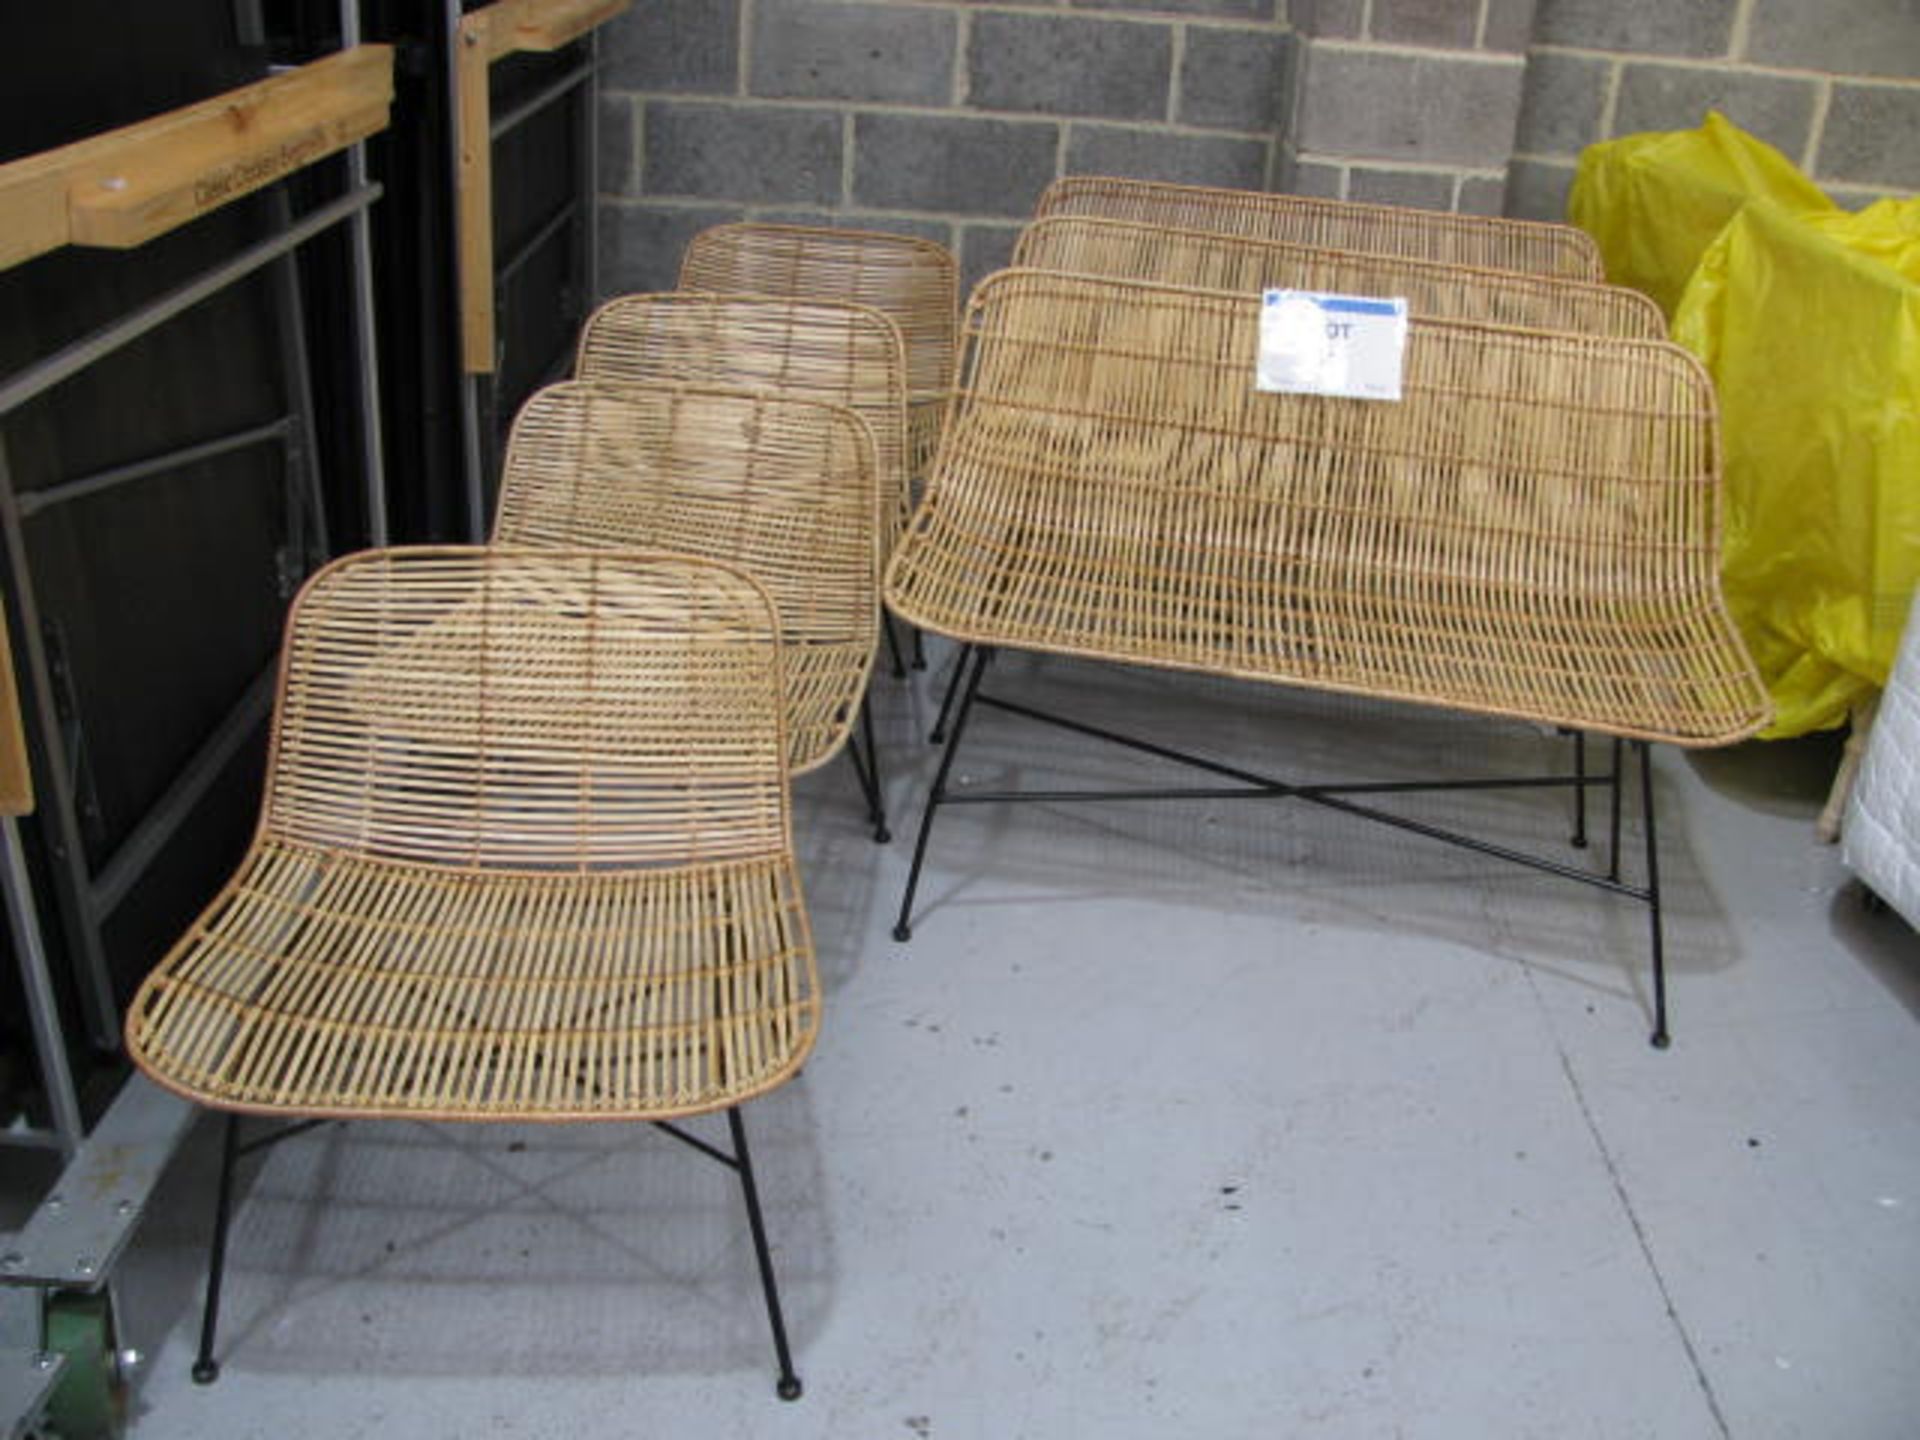 (4) Steel framed bamboo garden chairs and (3) benches